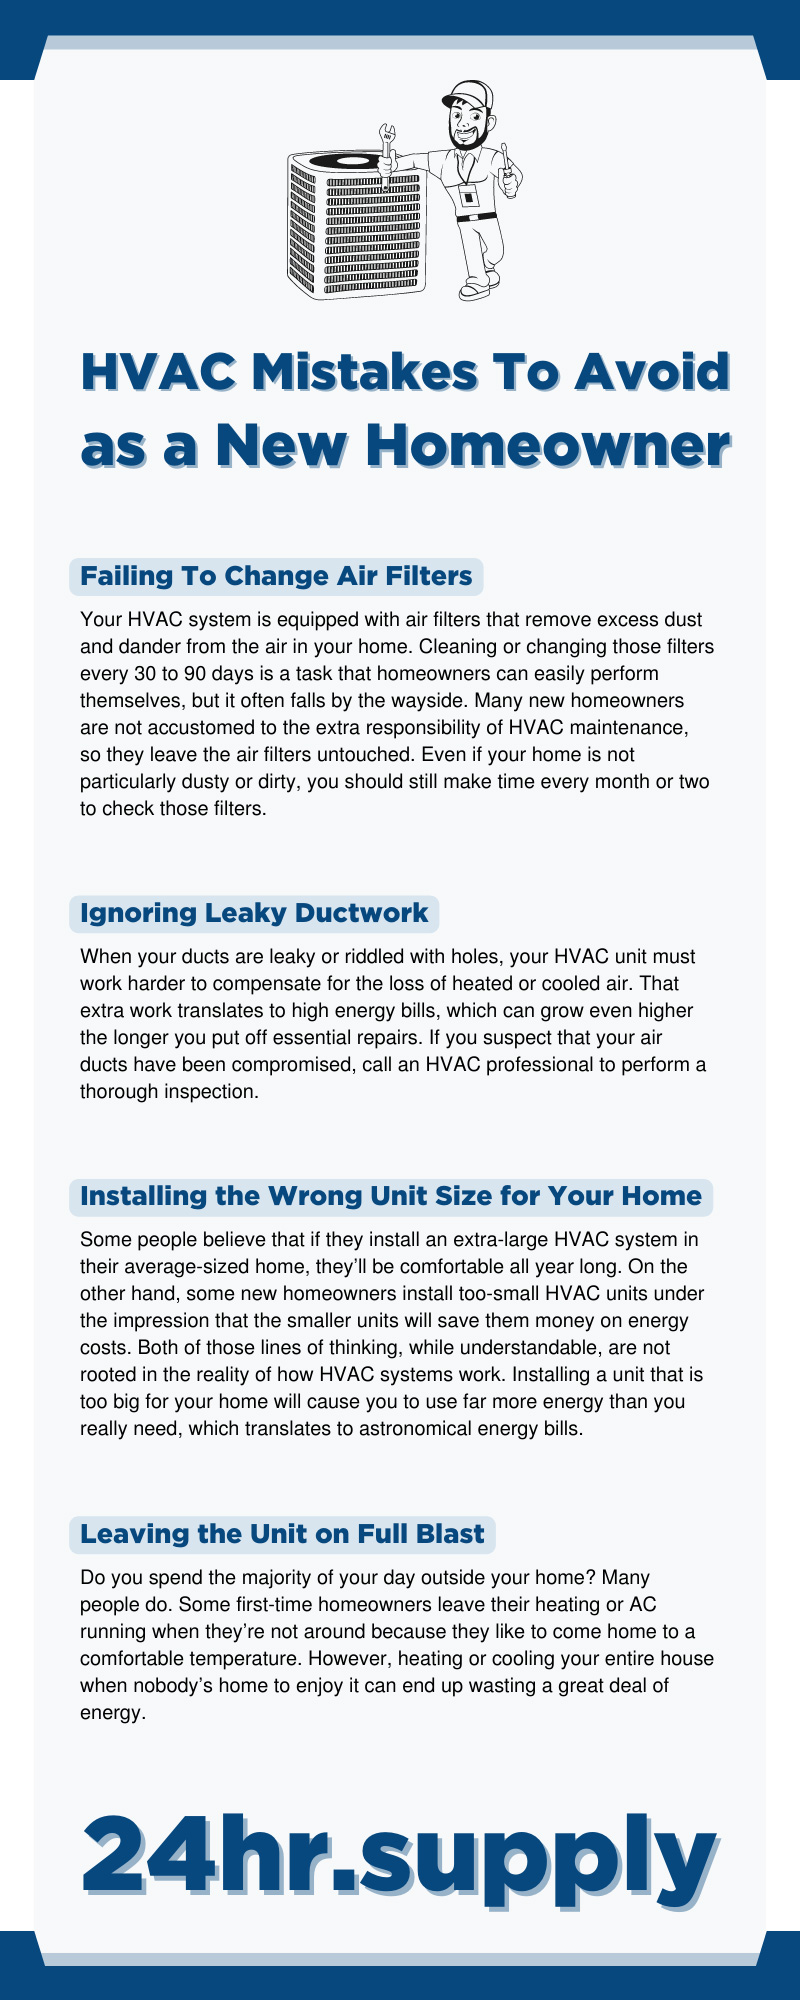 HVAC Mistakes To Avoid as a New Homeowner